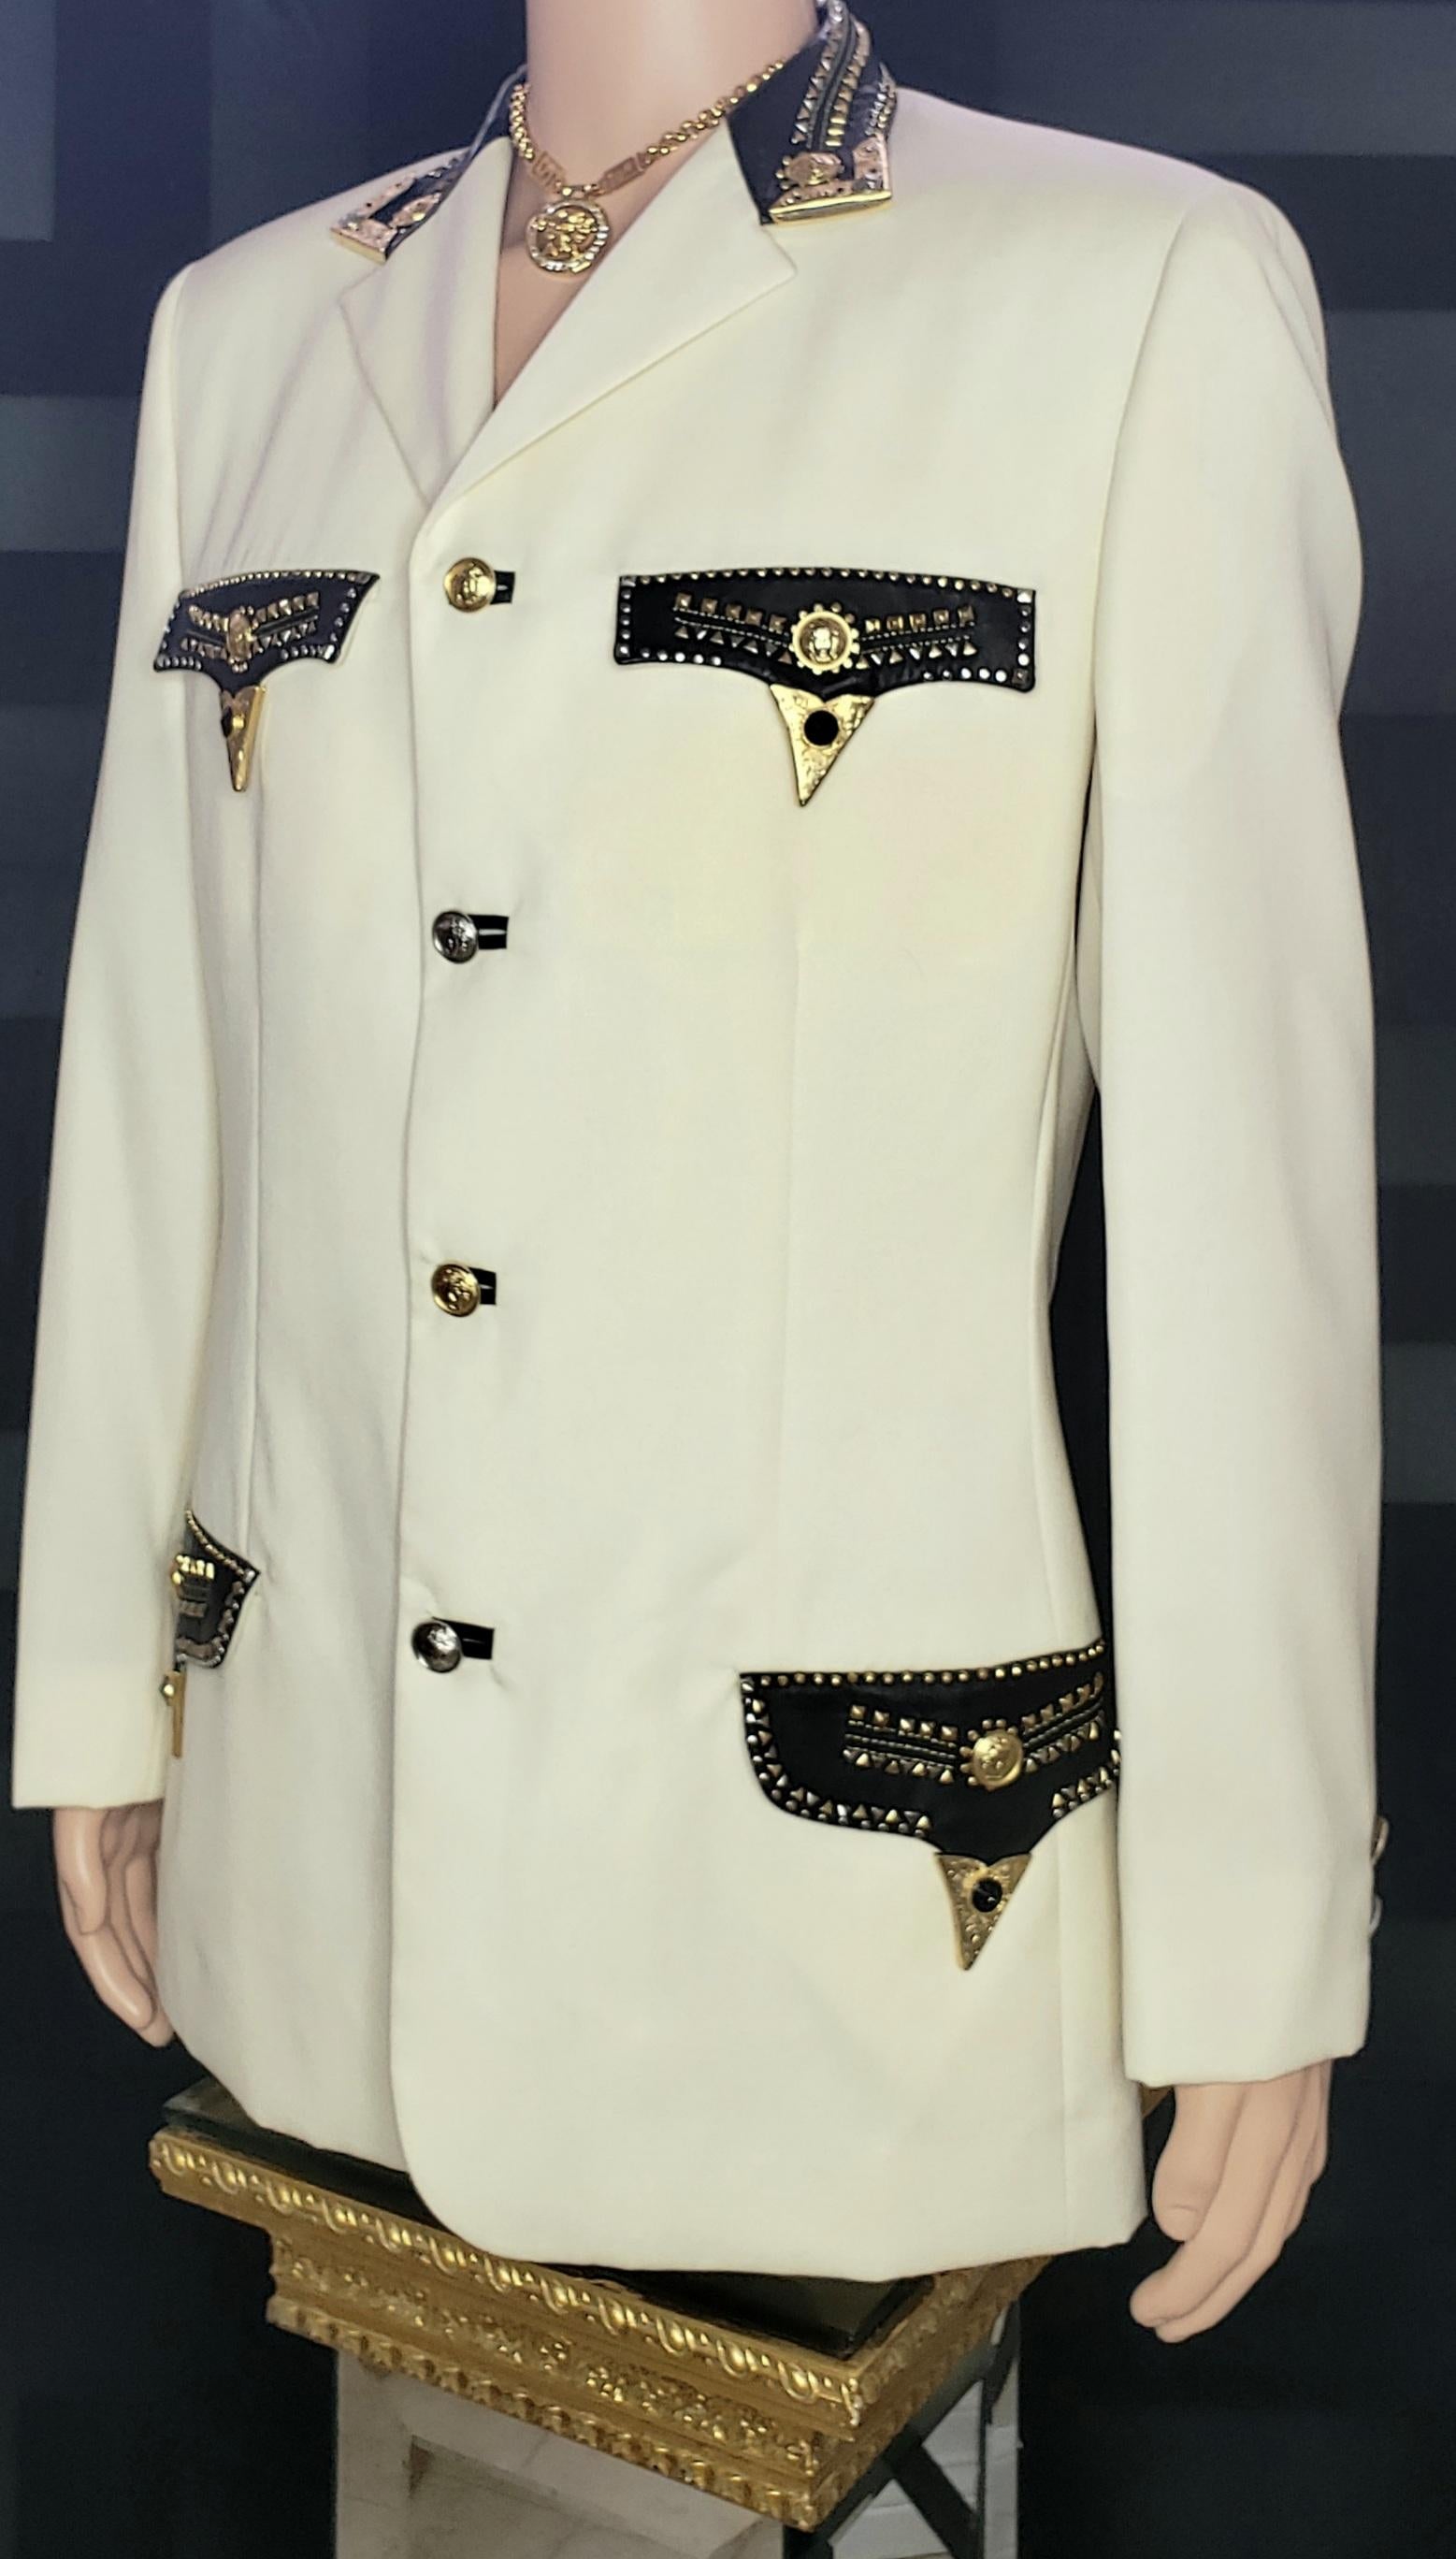 GIANNI VERSACE 

Beige Embellished Blazer Jacket
Leather and Gold-tone Metal trim
Front Gold-tone and Silver-tone button closure
Two buttons on the sleeves

Content: 100% Lana wool

Size IT 48 - US 38 (M)

Shoulder to shoulder 19